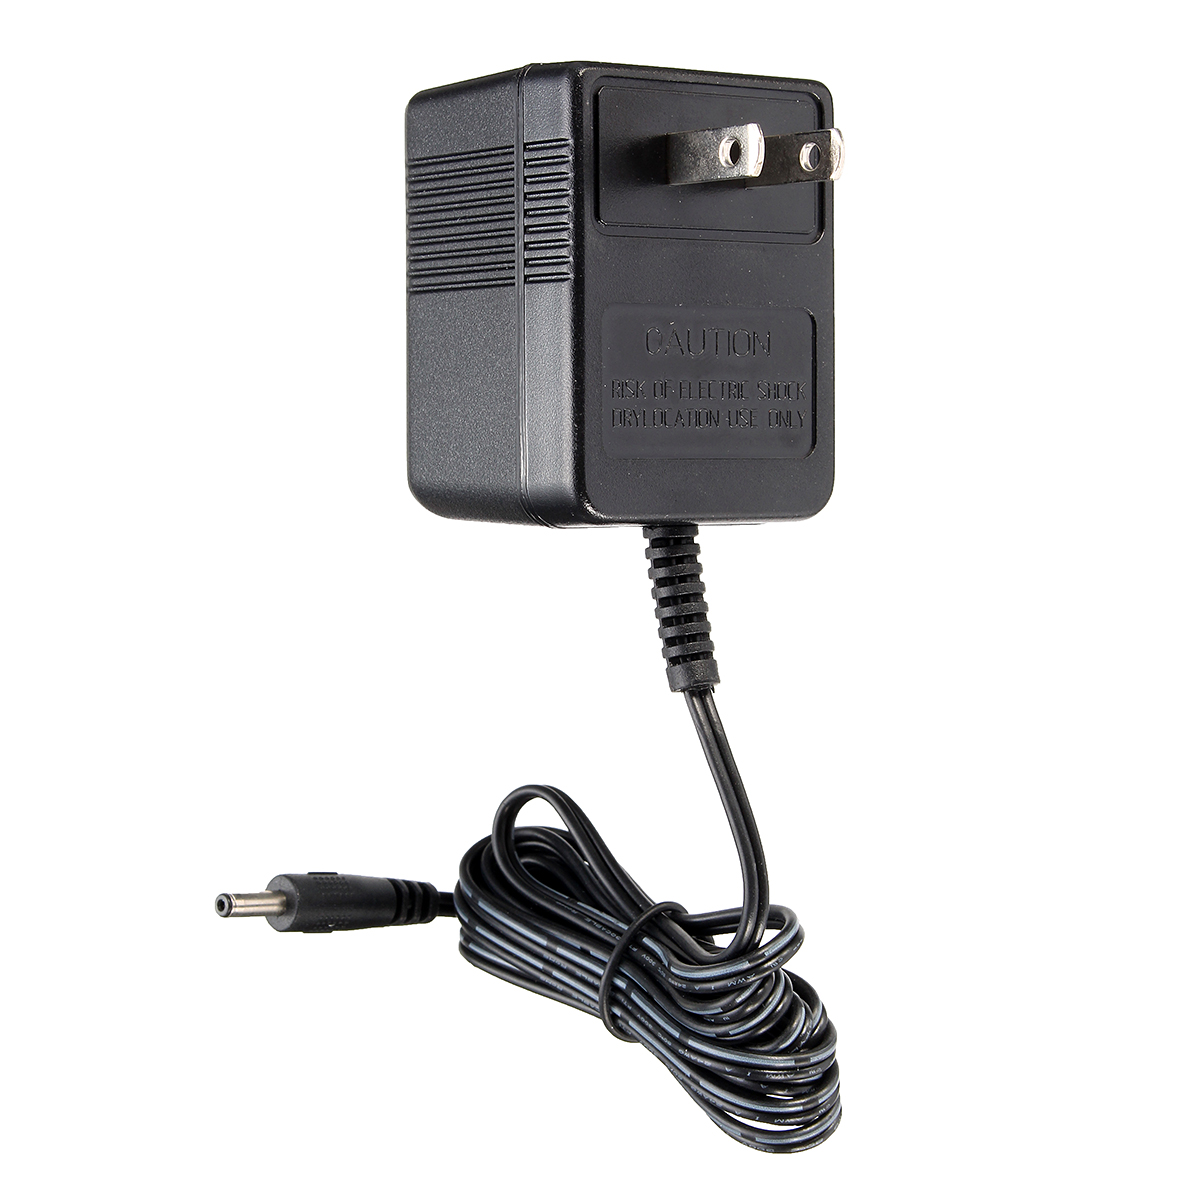 AC-100-V-240V-DC-45V-02-Adapter-USEU-Plug-Power-Supply-Charger-For-Wireless-Weather-Station-Clock-1389379-2